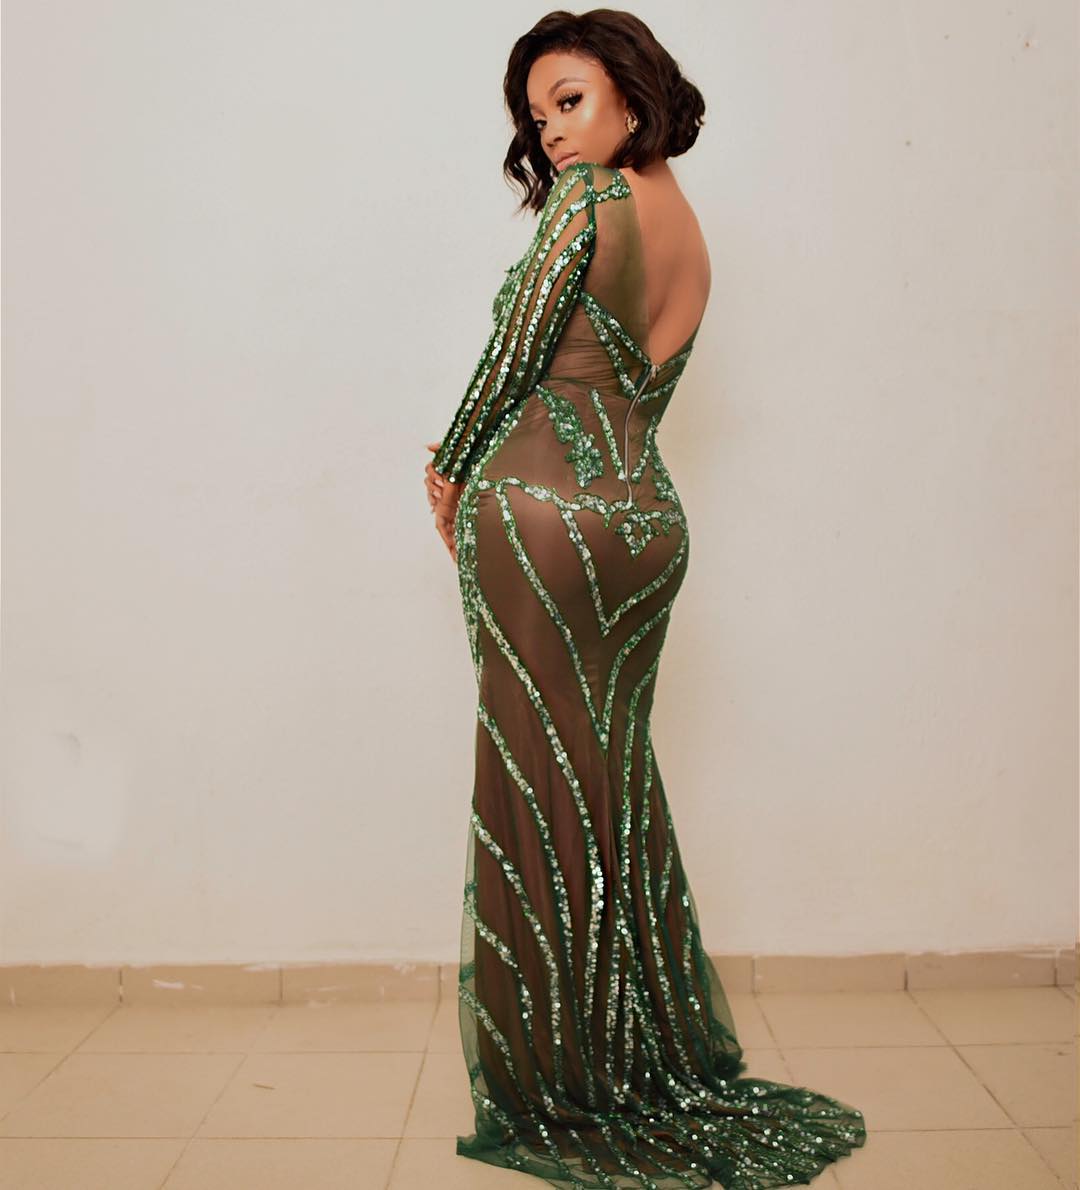 Toke Makinwa Wore Three Outfits At #MBGN2018 And She Slayed Every Look!